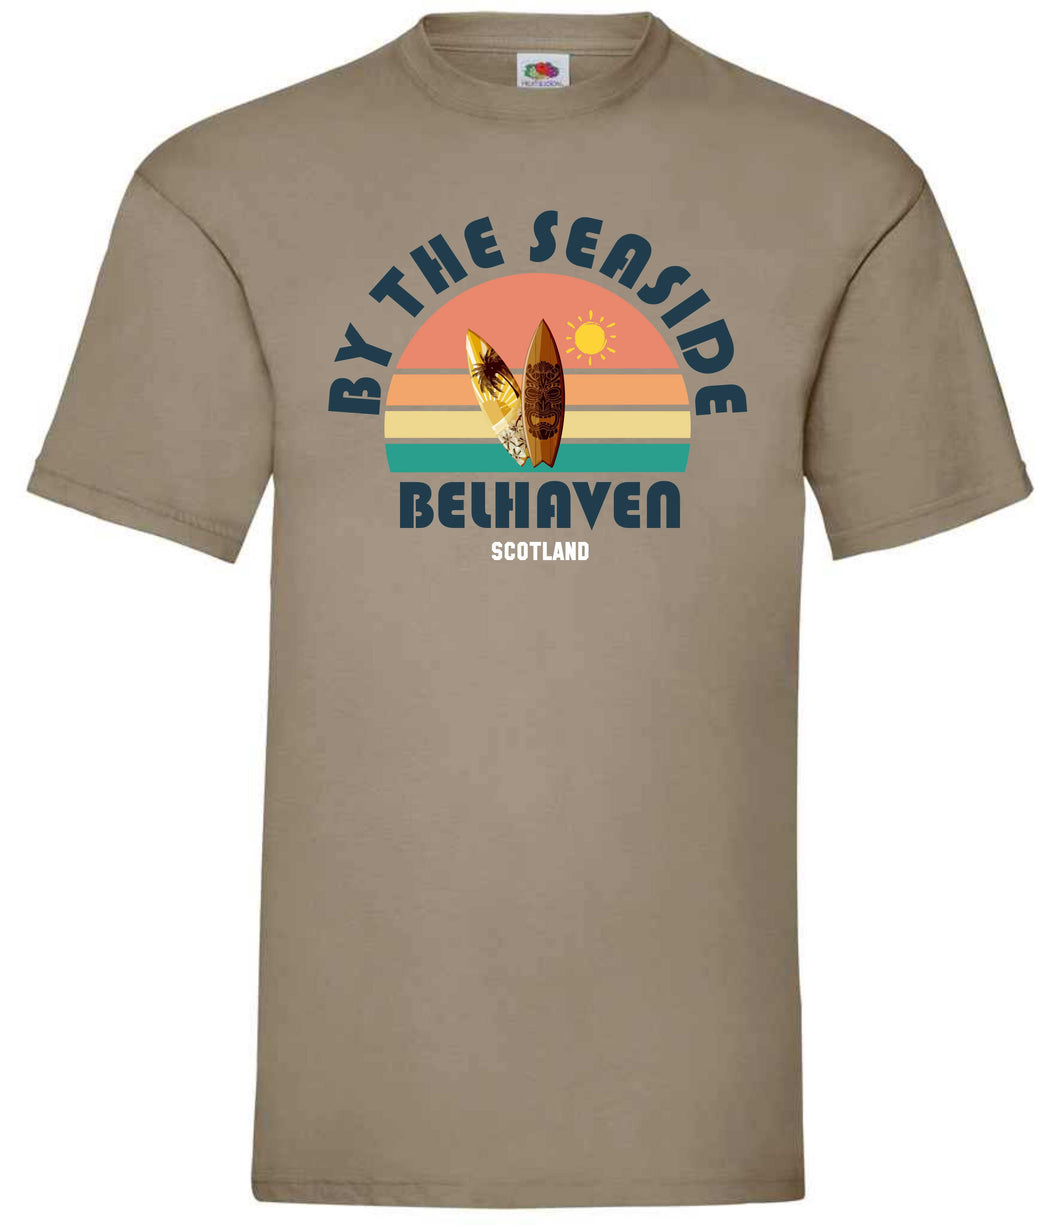 Belhaven by the Sea T-Shirt